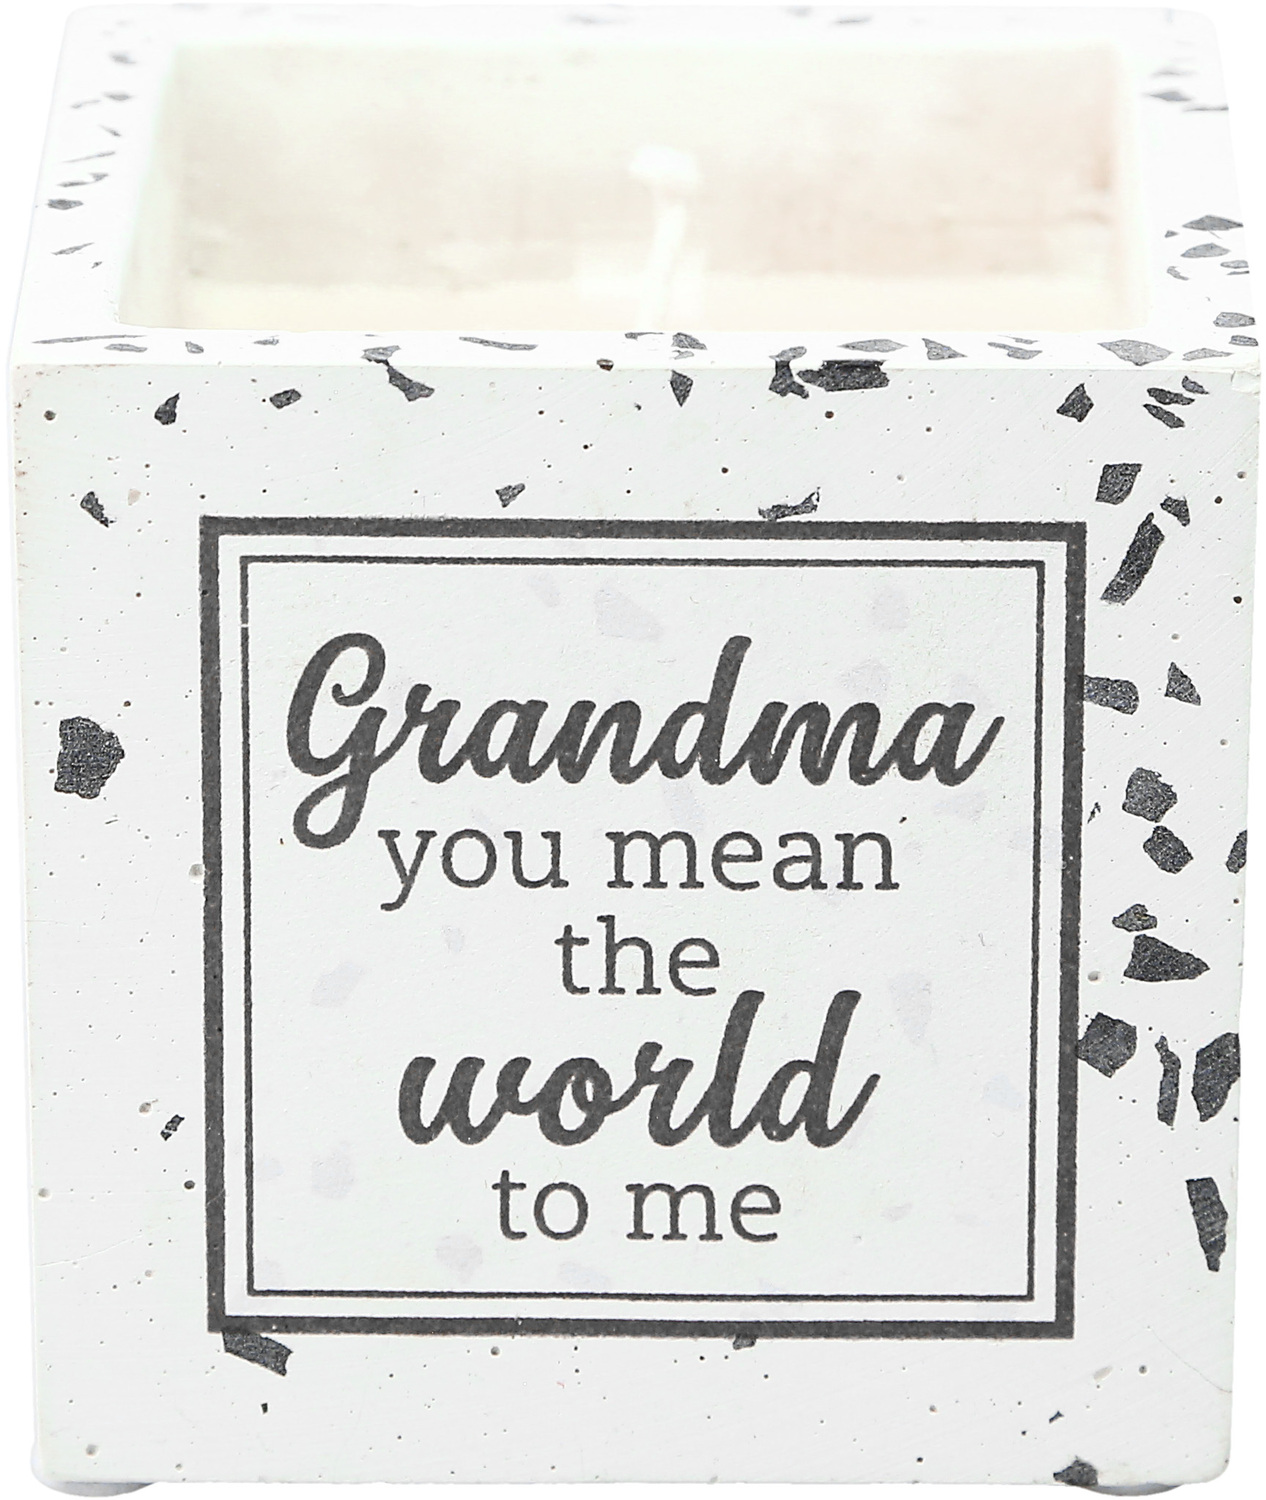 Grandma by Farmhouse Family - Grandma - 8 oz - 100% Soy Wax Candle Scent: Tranquility